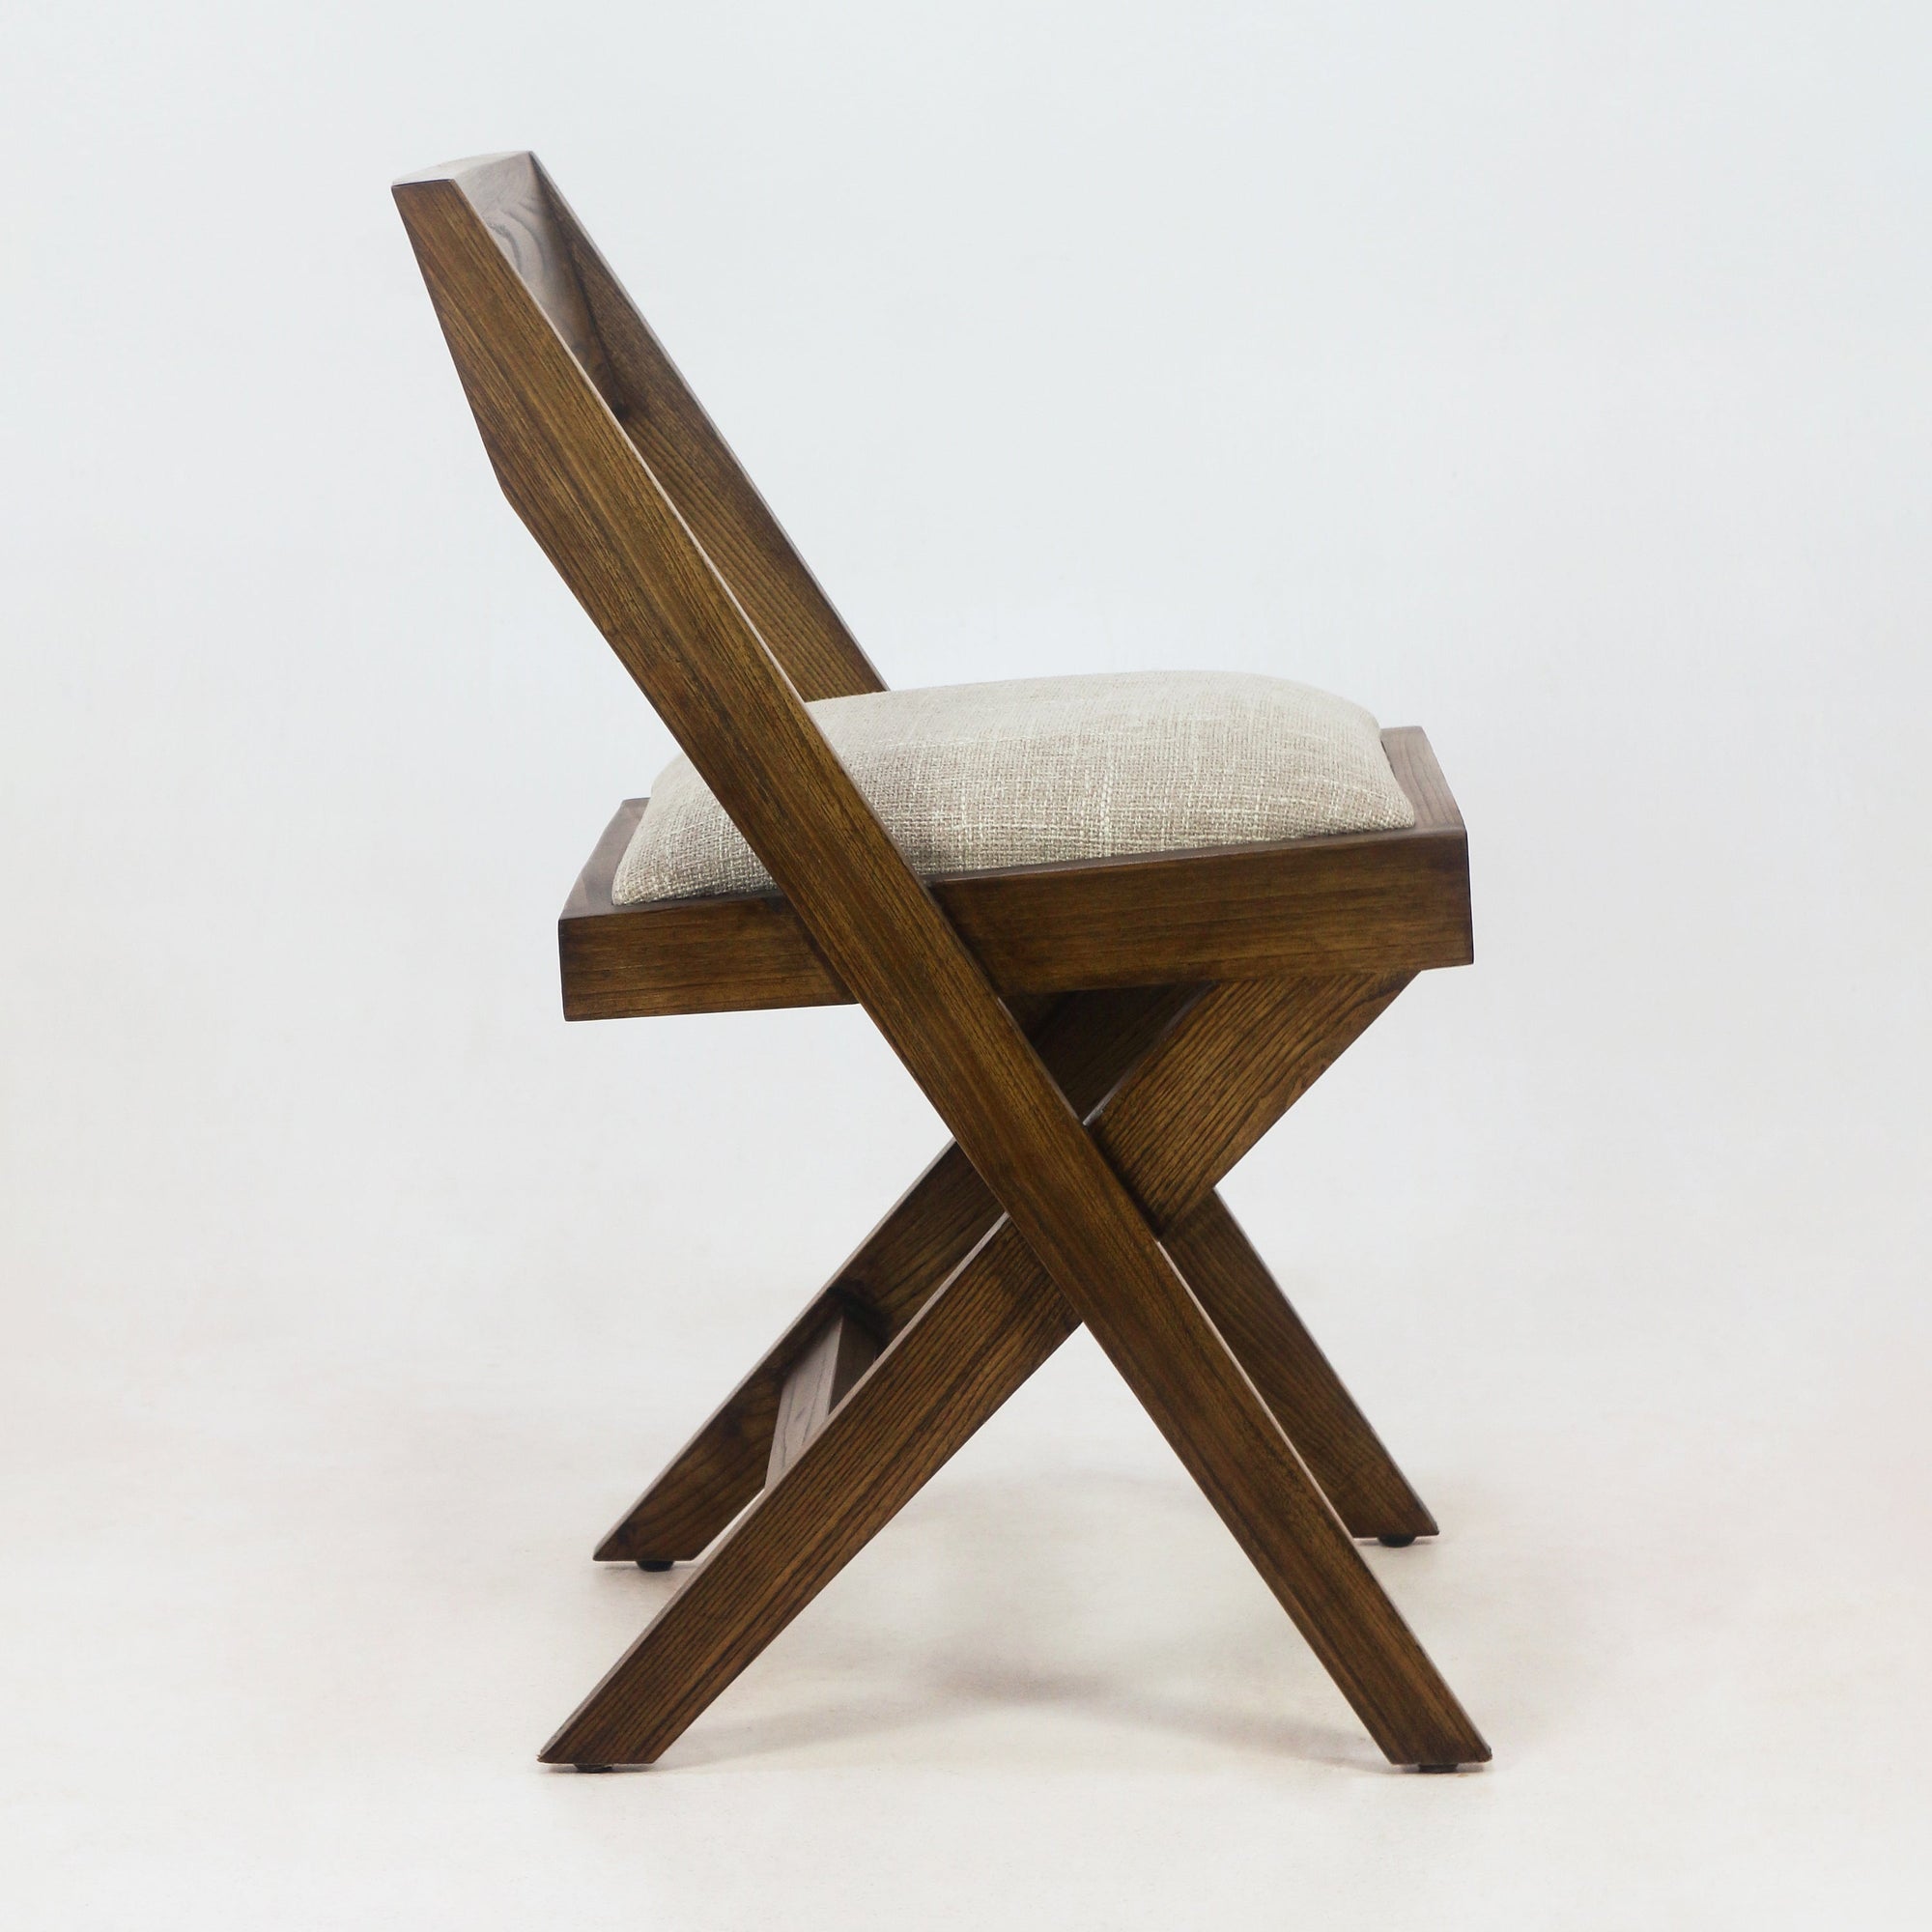 Solid Oak Jeanneret Inspired Side Chair with Cushion - INTERIORTONIC